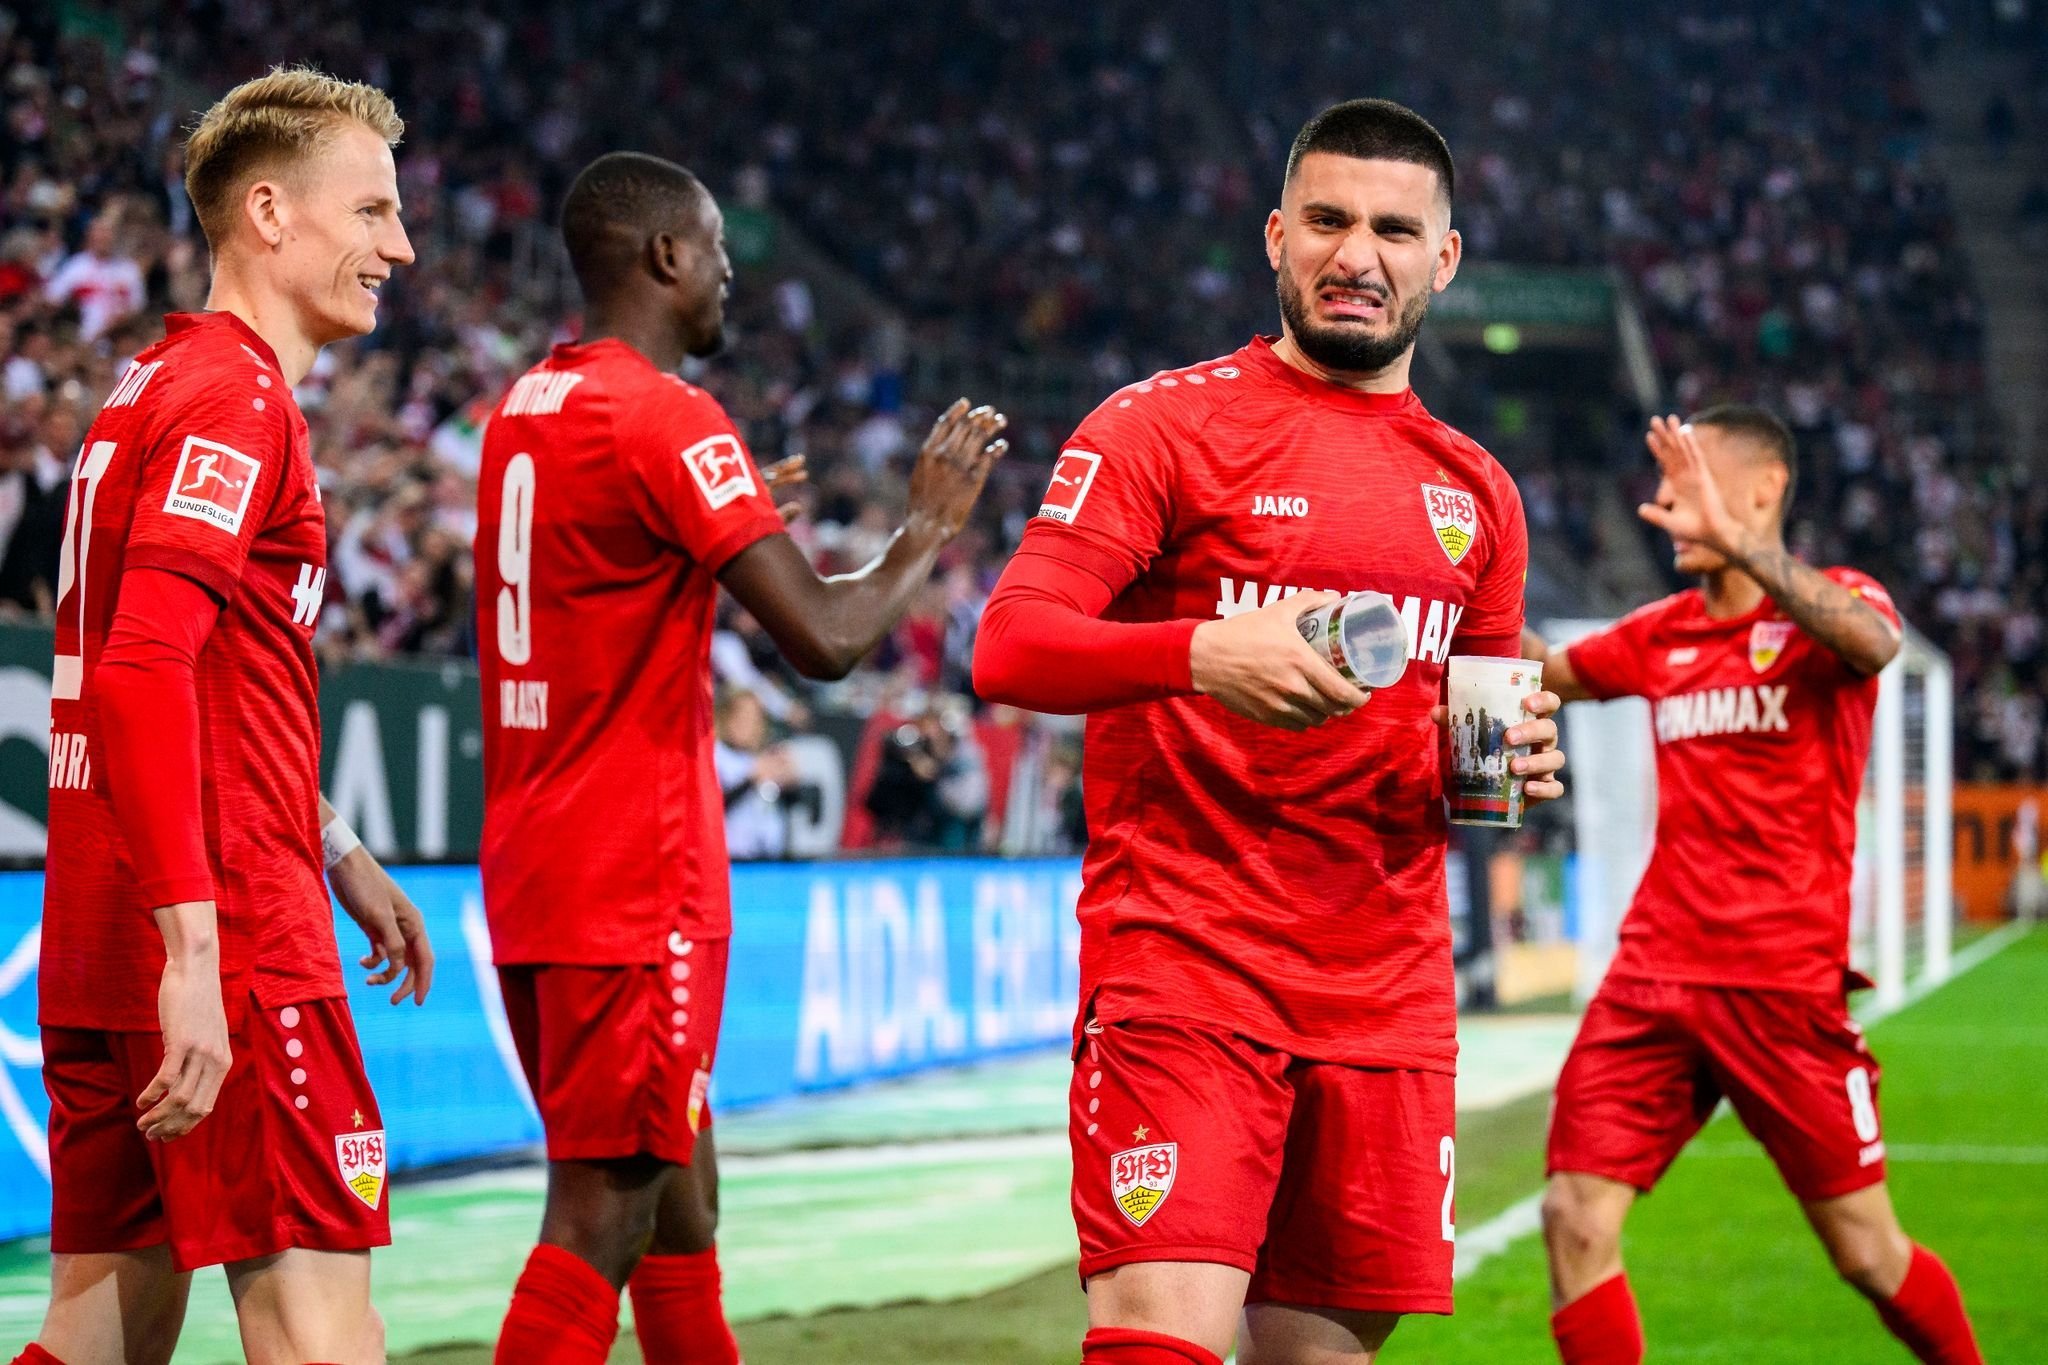 On loan Undav wants to play Champions League with VfB